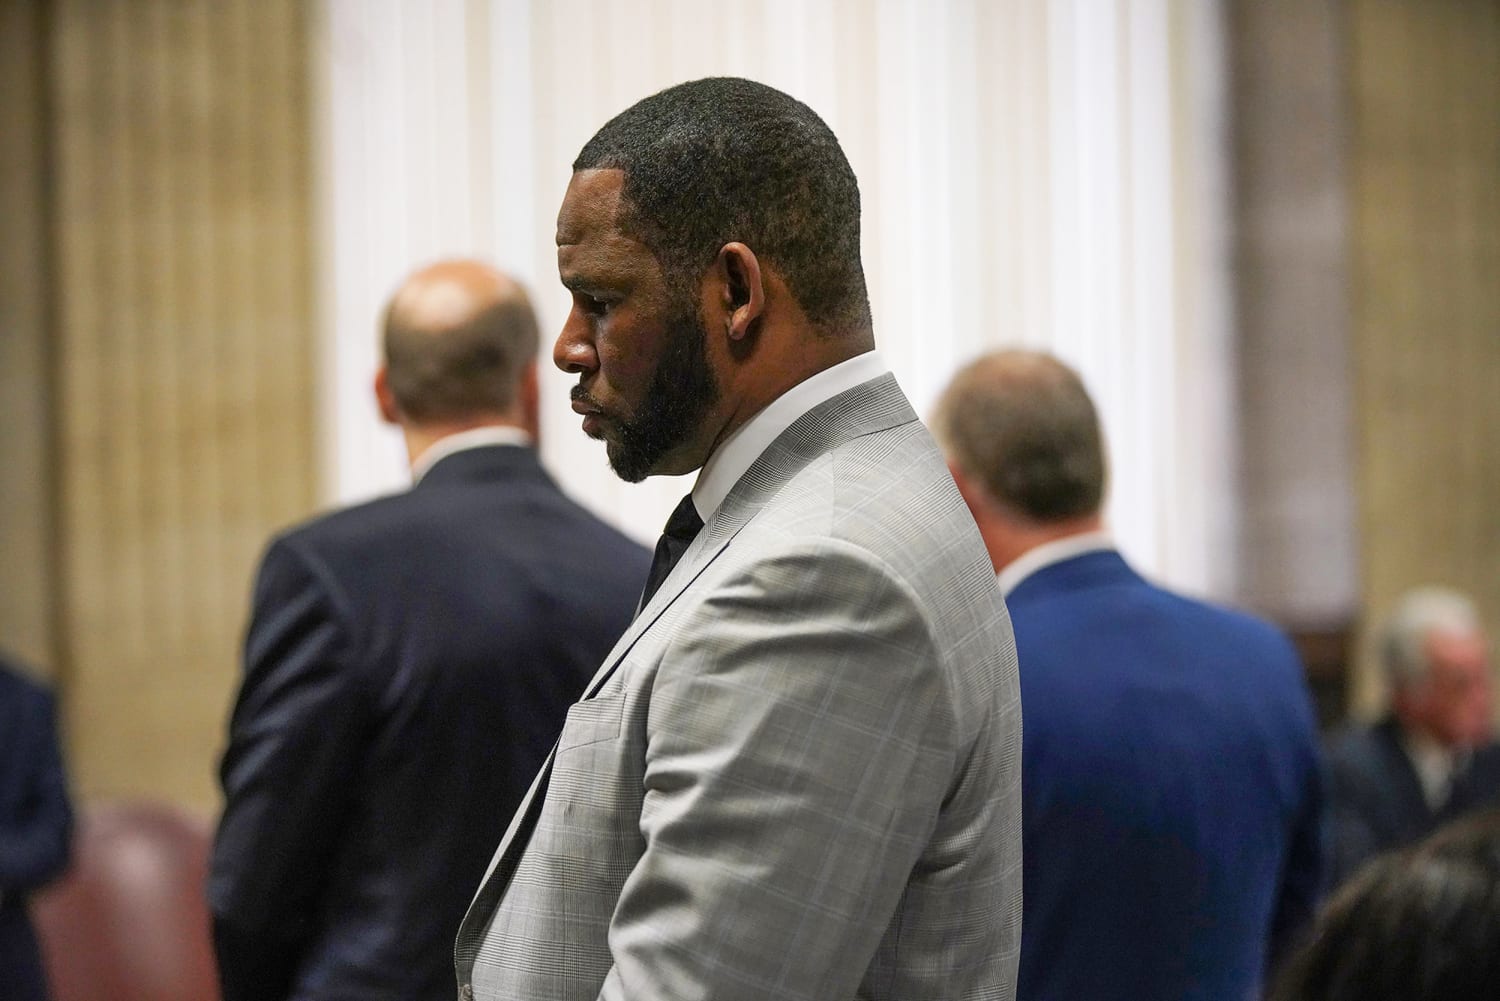 Navy Girls - R. Kelly sexually assaulted minors and paid witnesses to cover up evidence,  prosecutors say as his trial begins